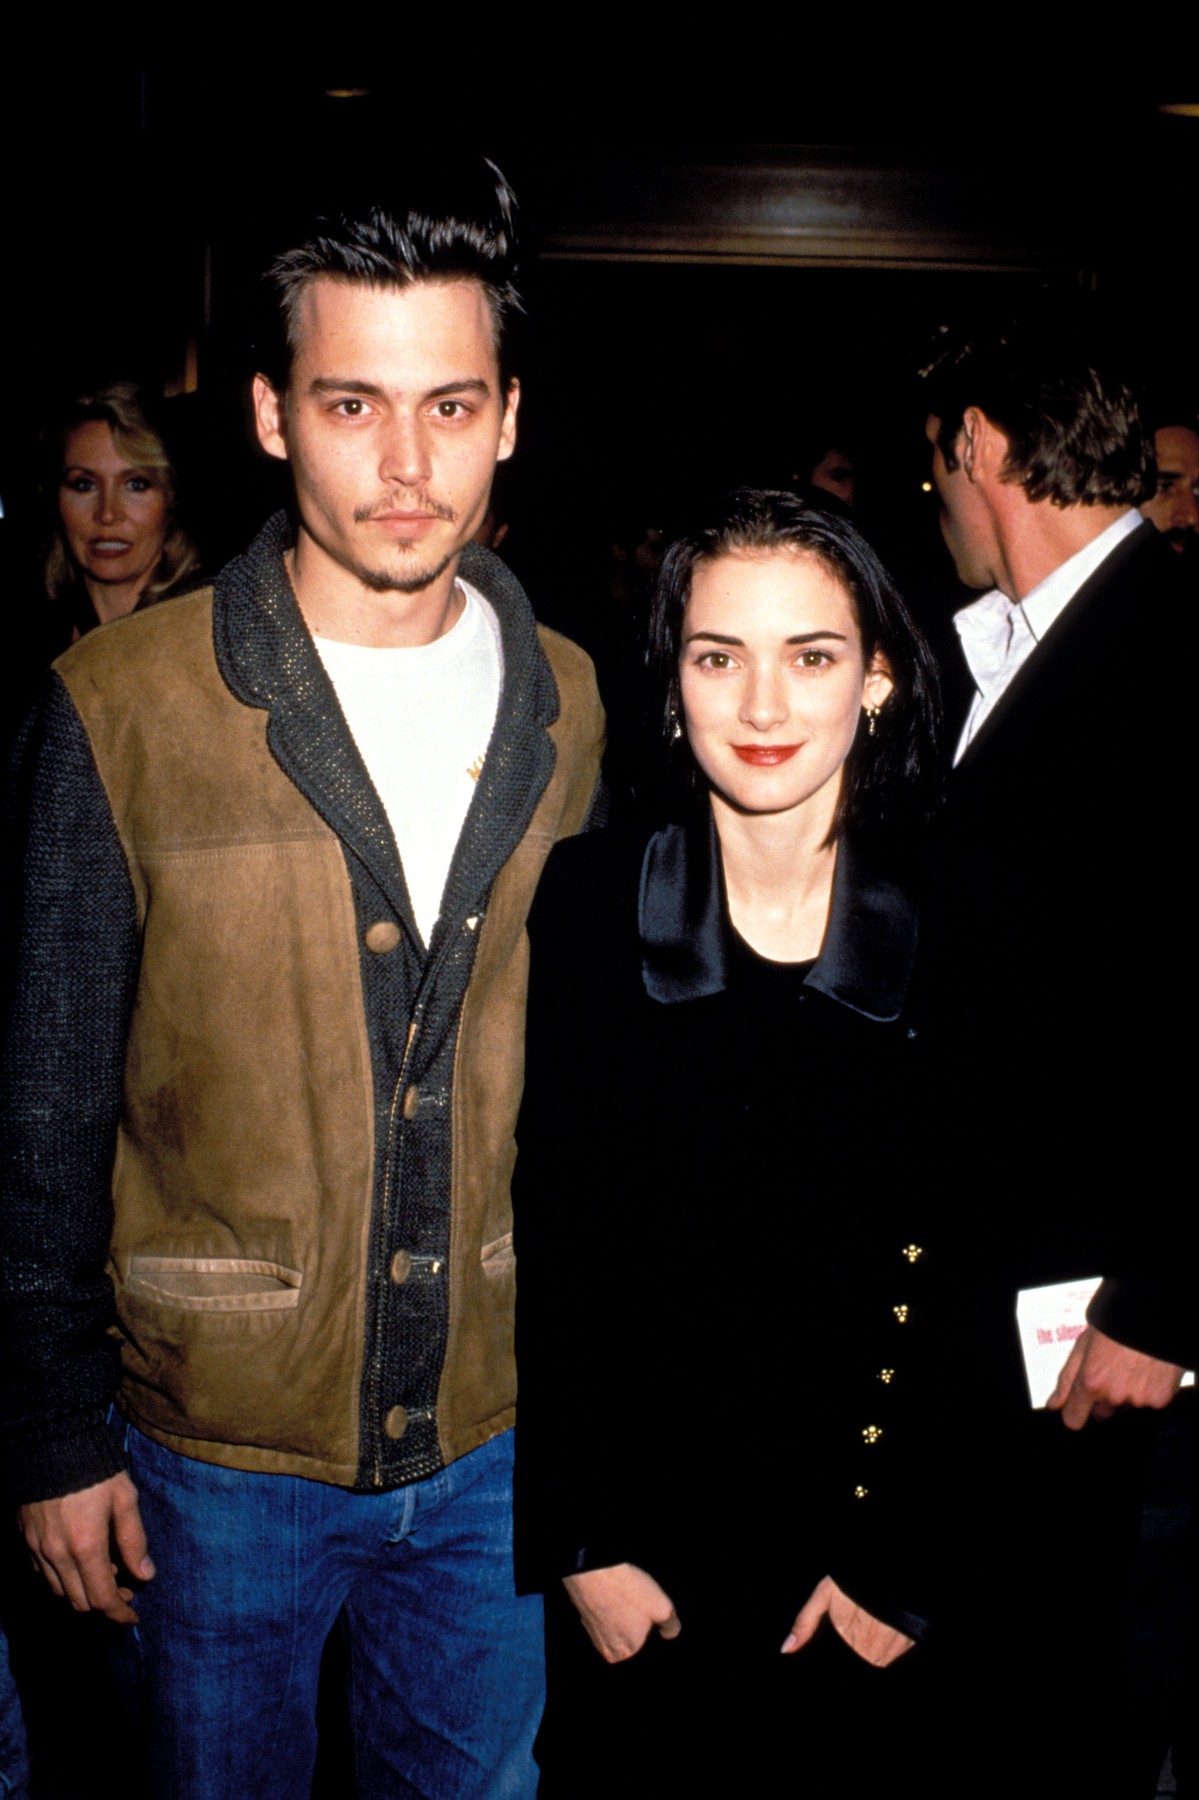 Nov 07, 2002; Los Angeles, CA, USA; File photo. Date unknown. Oscar-nominated actress WINONA RYDER was found guilty of shoplifting charges on 11/06/02. A six-man, six-woman jury found her guilty of grand theft and vandalism but not guilty of commercial burglary. The 31-year-old star of 'Girl, Interrupted' was charged with grand theft, burglary and vandalism for allegedly stealing more than ,500 worth of merchandise from the Saks Fifth Avenue store on December 12, 2001. Ryder will return to court for sentencing on Dec. 6. Picture shows Winona with former boyfriend, actor JOHNNY DEPP..,Image: 523476528, License: Rights-managed, Restrictions: , Model Release: no, Credit line: Jane Caine / Zuma Press / Profimedia